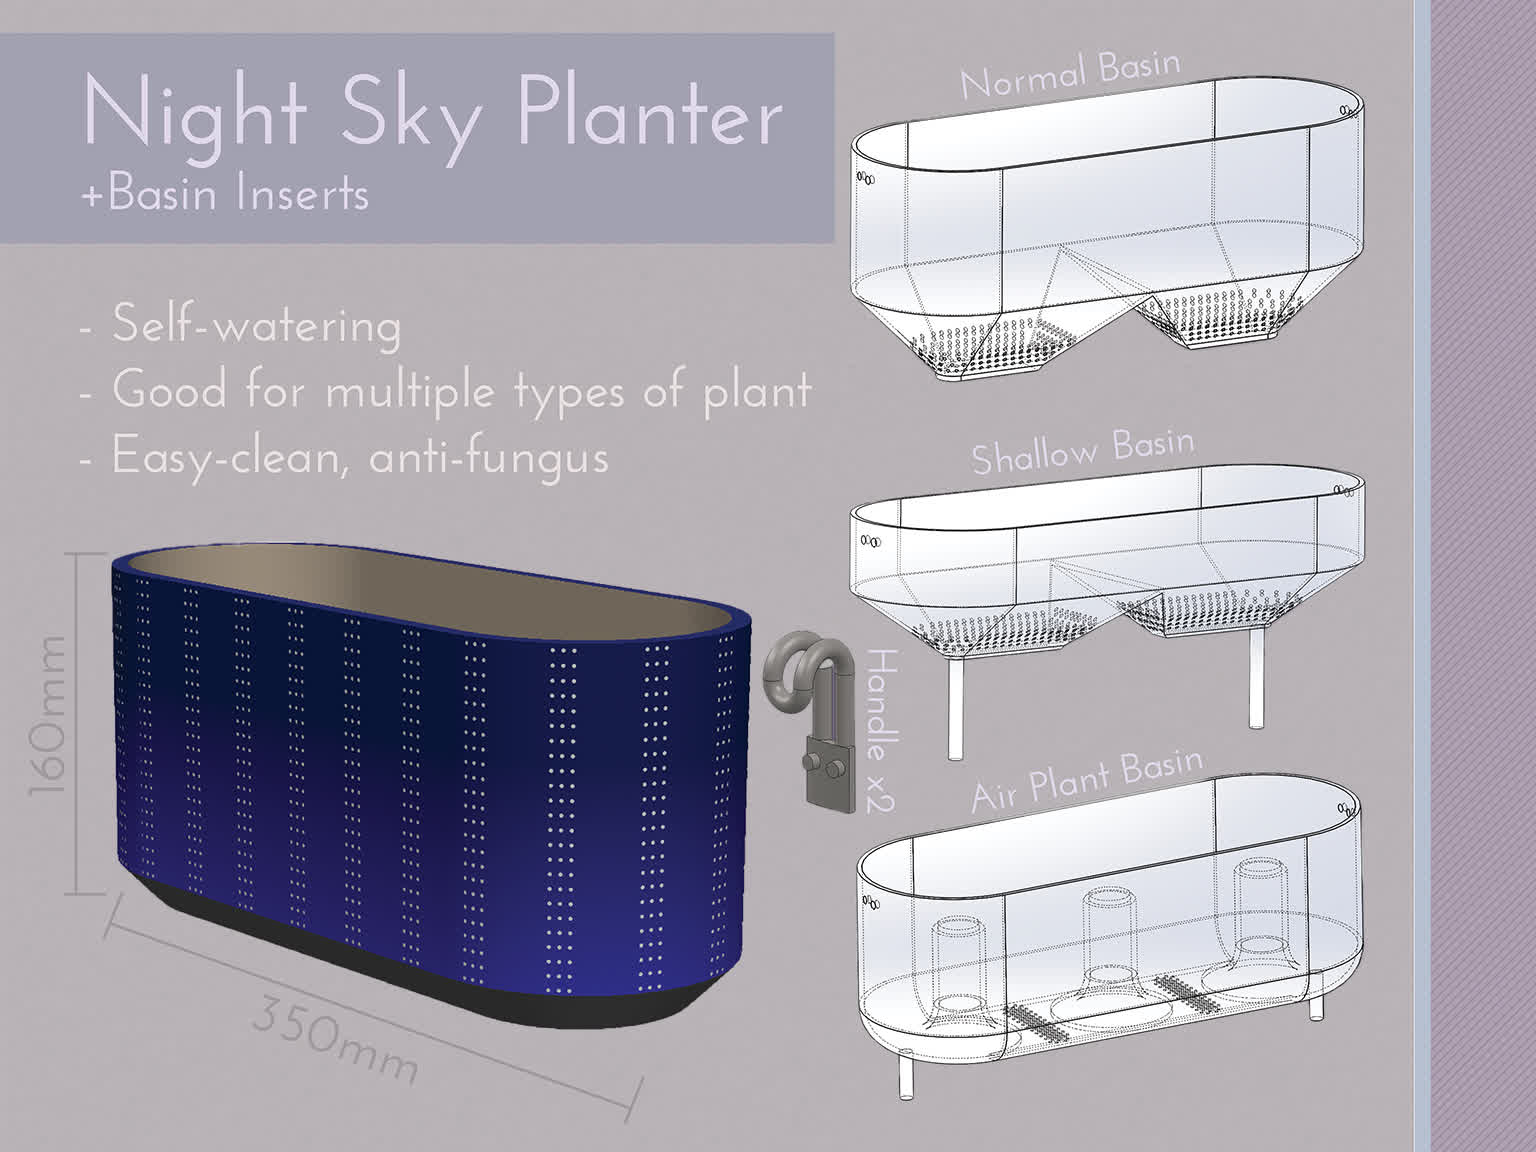 Plant pot inspired by the night sky. Variable inserts provide different growing conditions for different kinds of plants